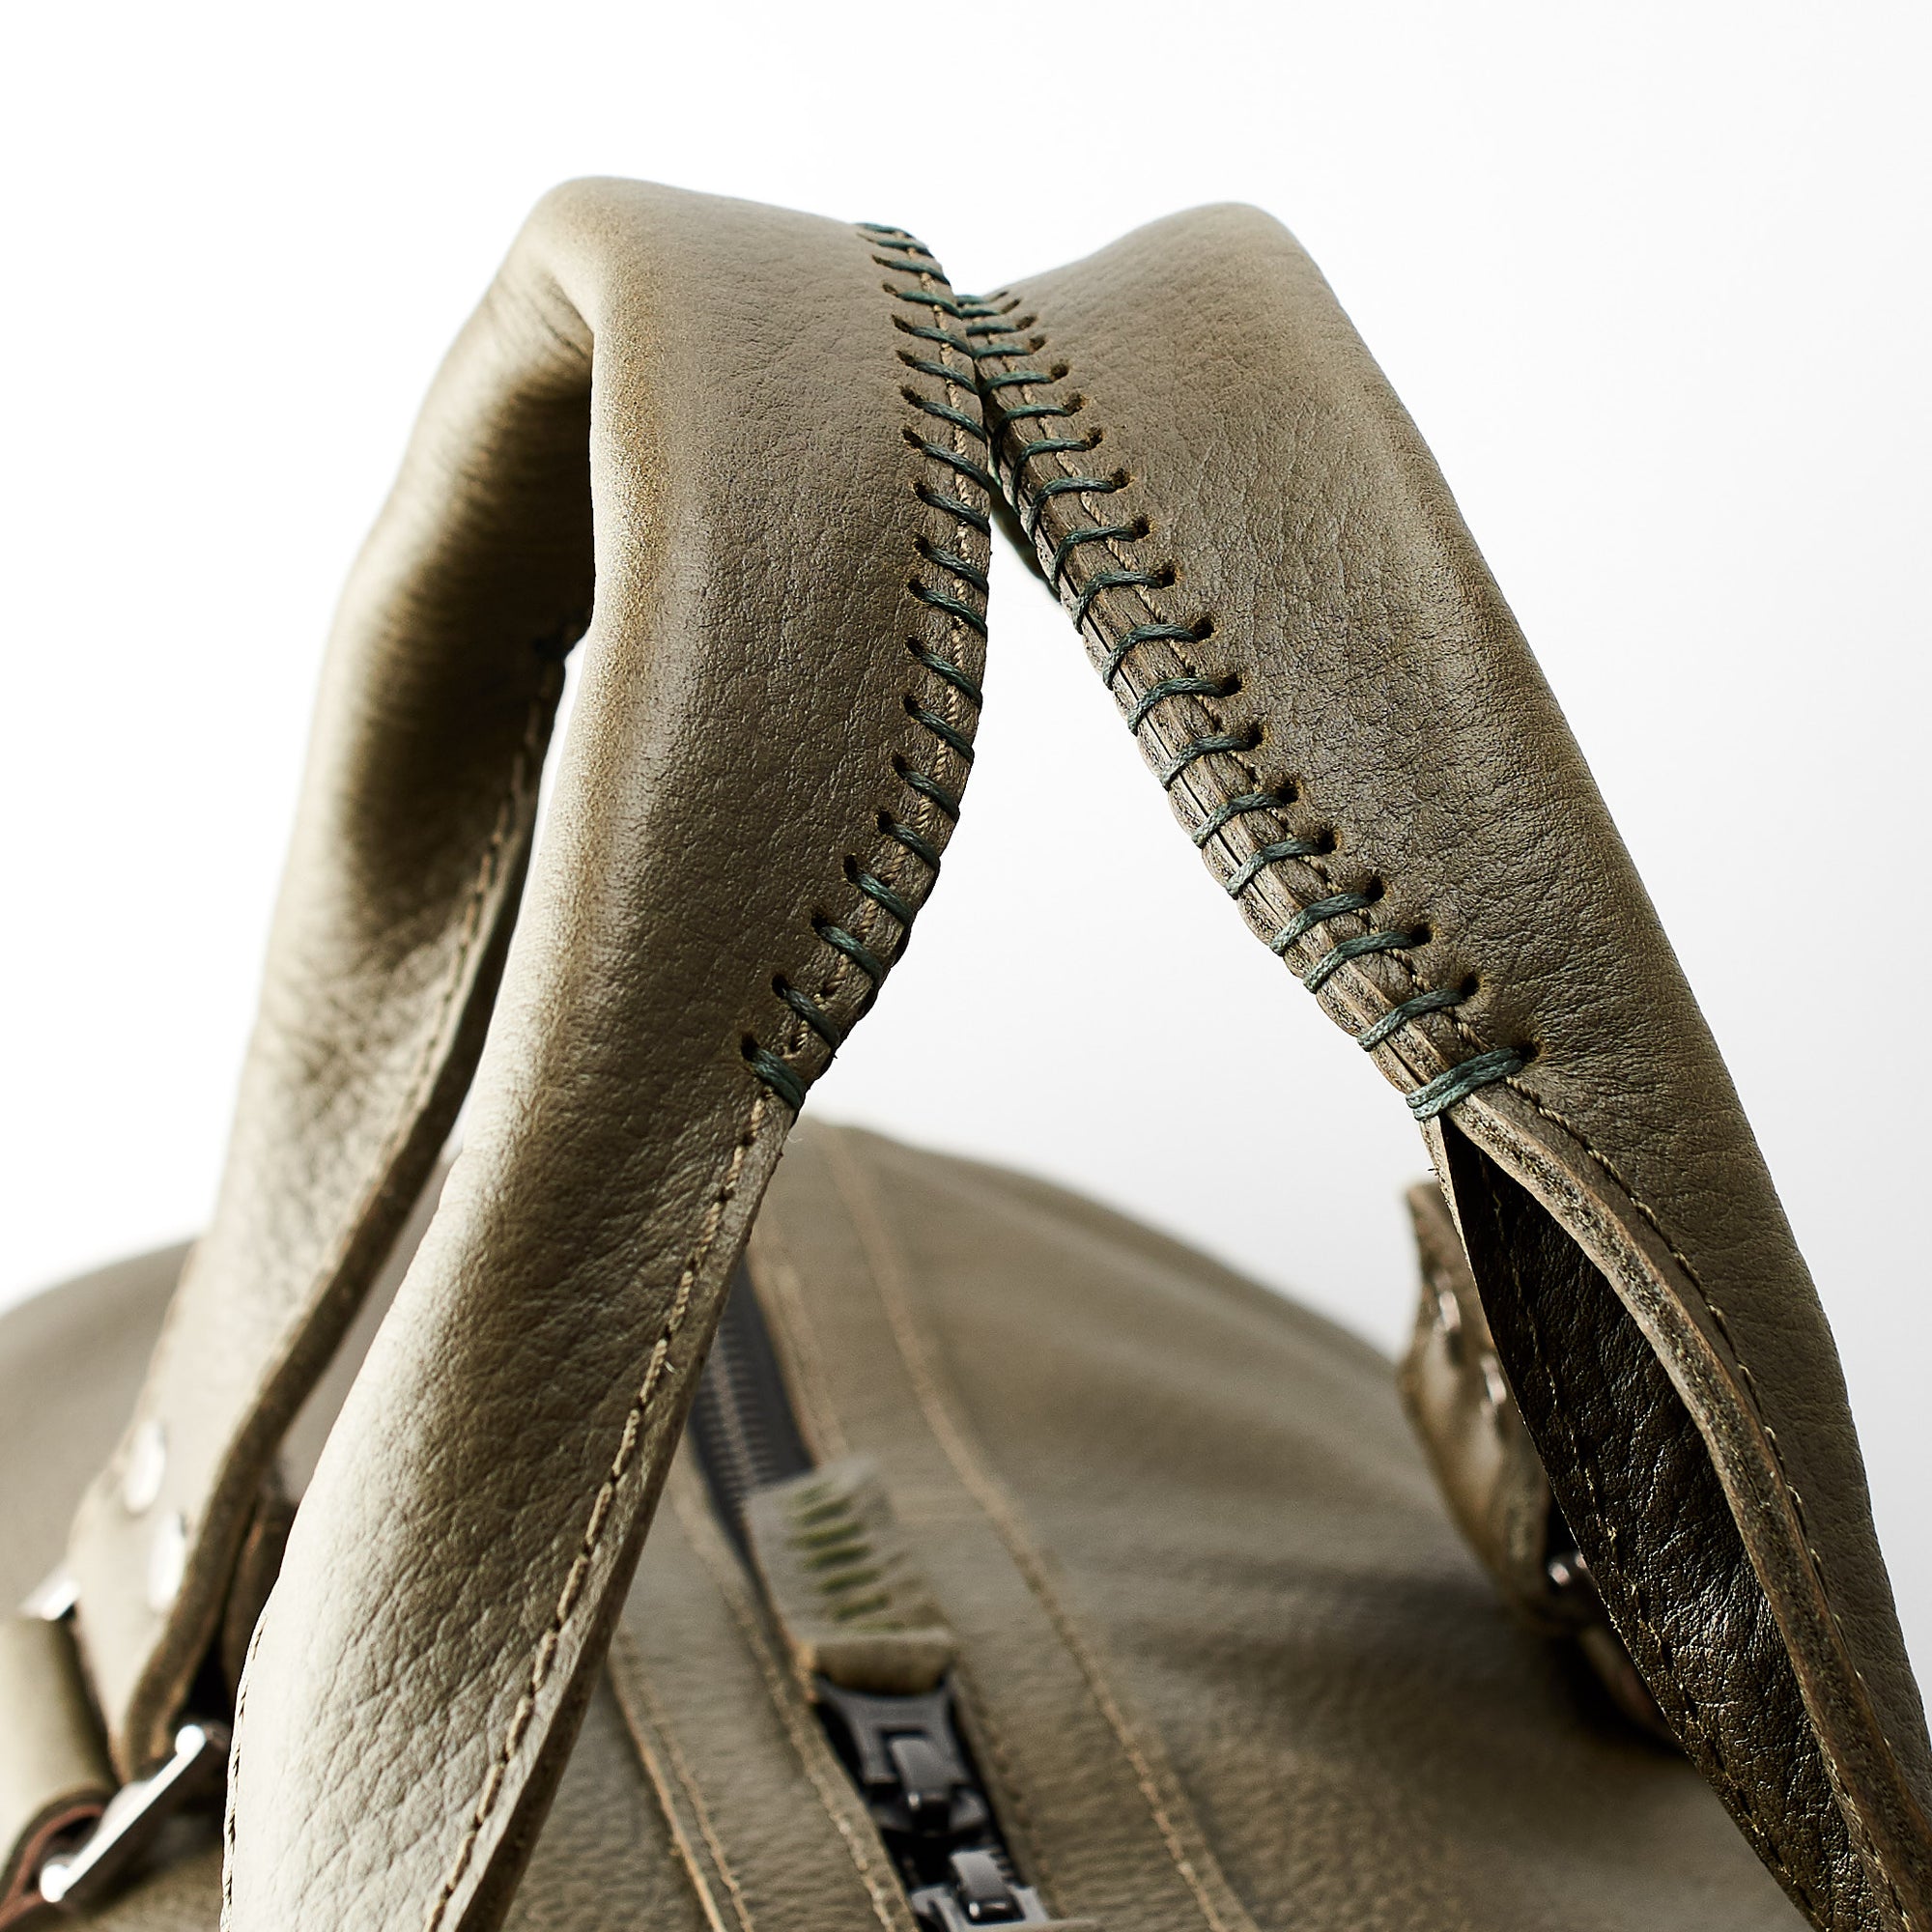 Hand stitched handles. Green leather athletic duffle bag for weekend